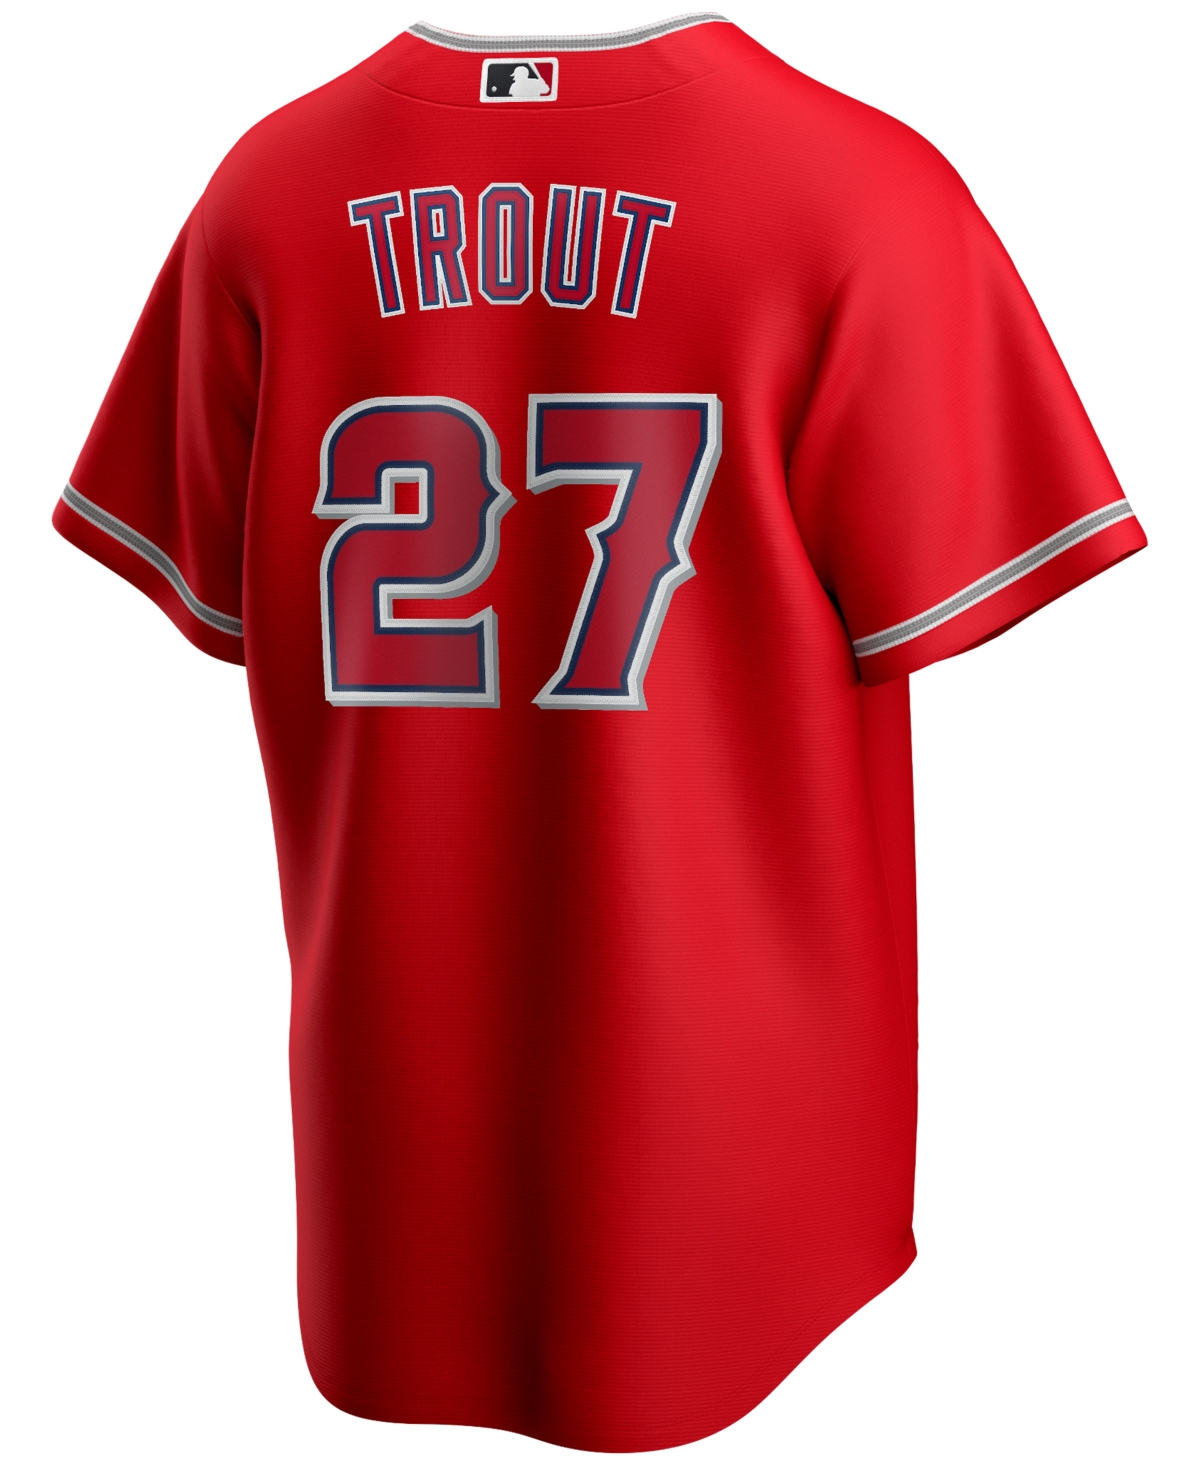 Nike Men's Mike Trout Los Angeles Angels Official Player Replica Jersey